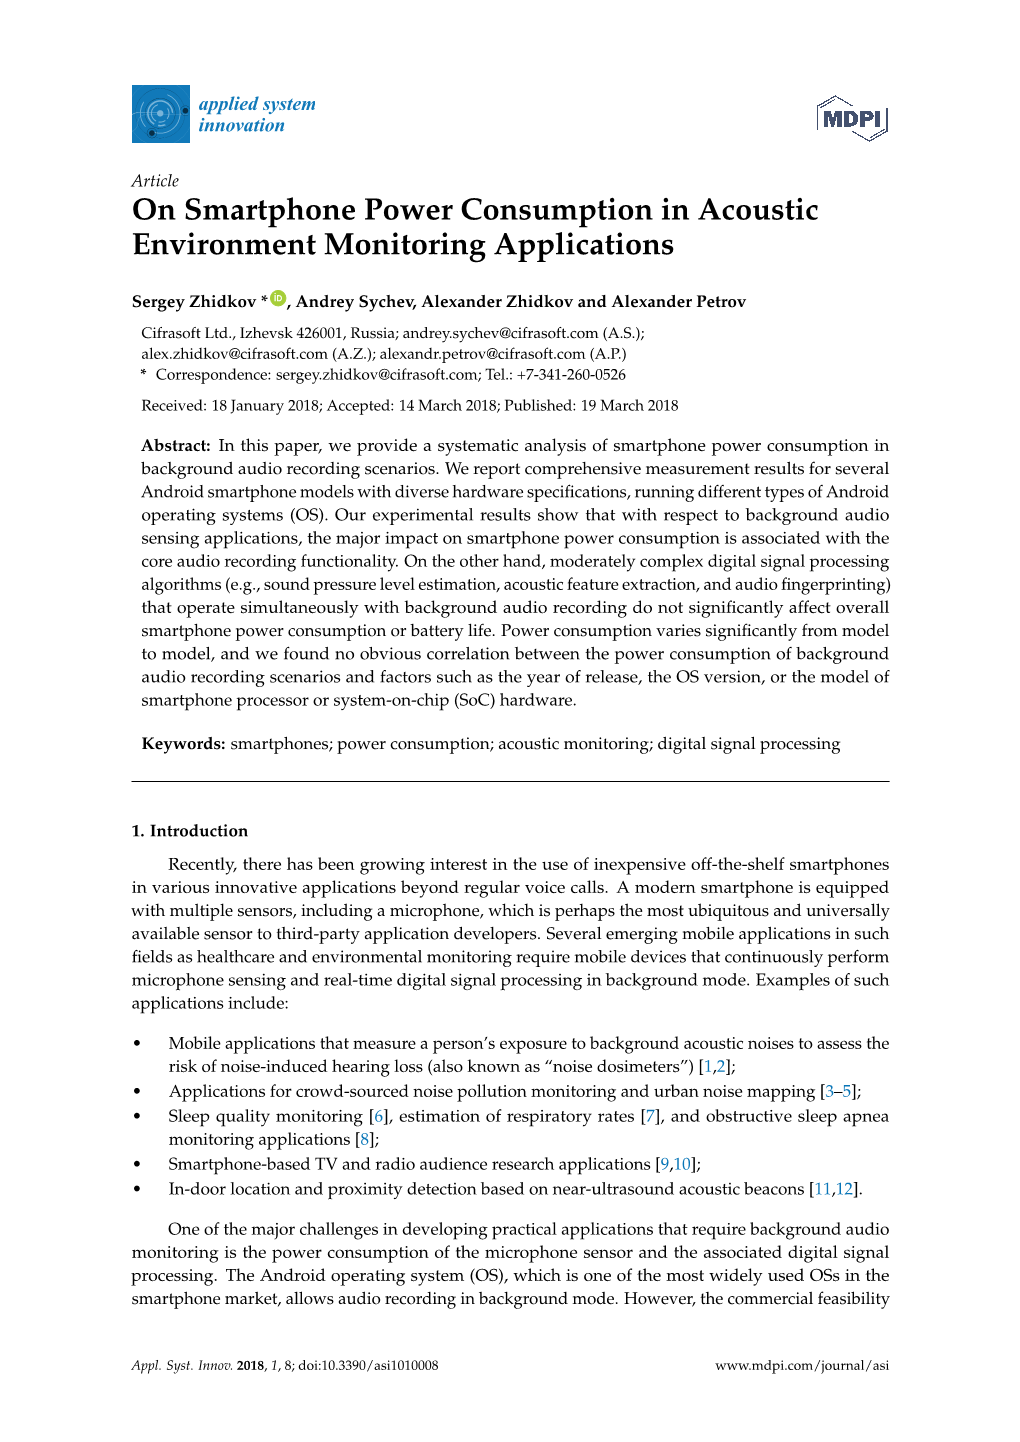 On Smartphone Power Consumption in Acoustic Environment Monitoring Applications